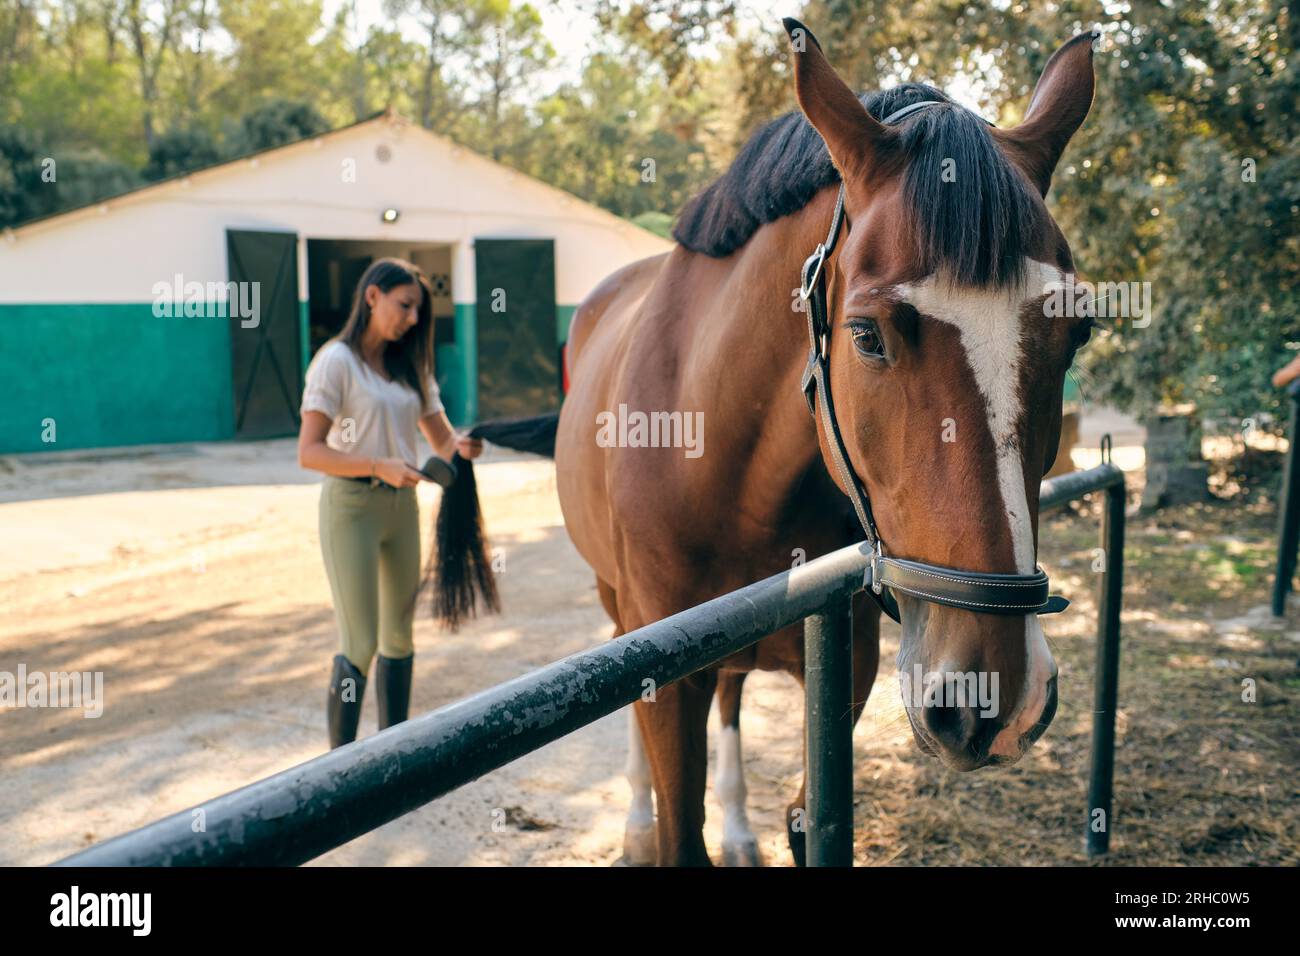 Blurred female equestrian brushing long tail of chestnut horse in reins standing near railing in paddock in countryside Stock Photo